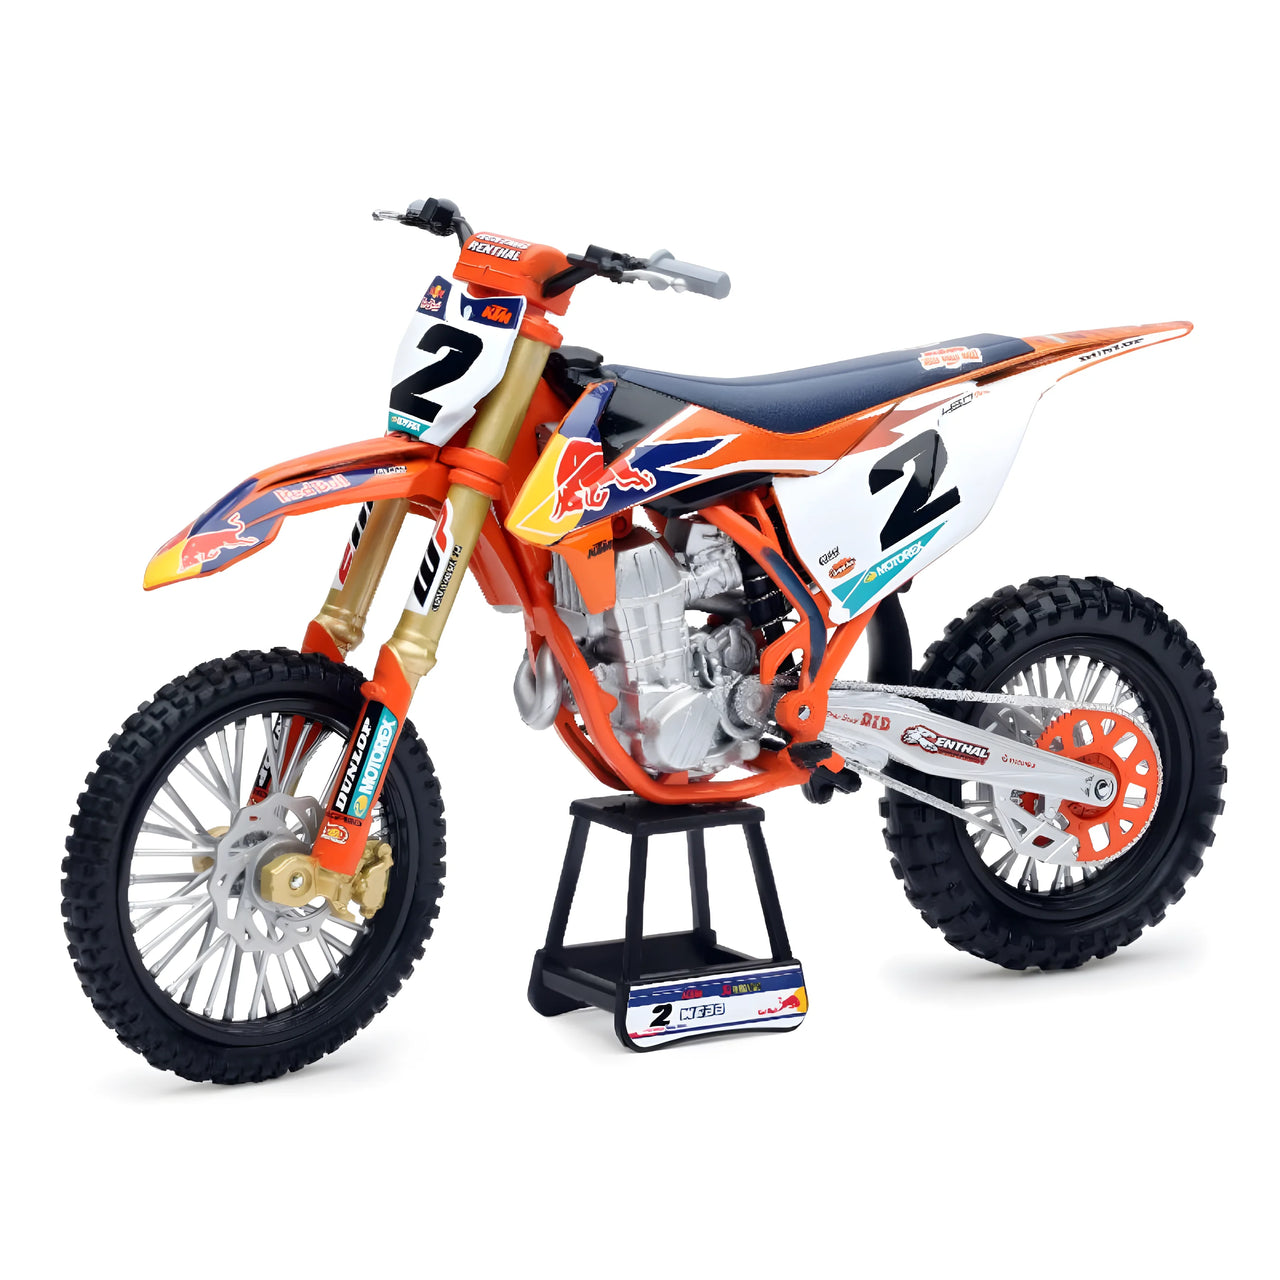 58213 Motorcycle Cooper Webb Red Bull KTM 450 SX-F 2019 Scale 1:10